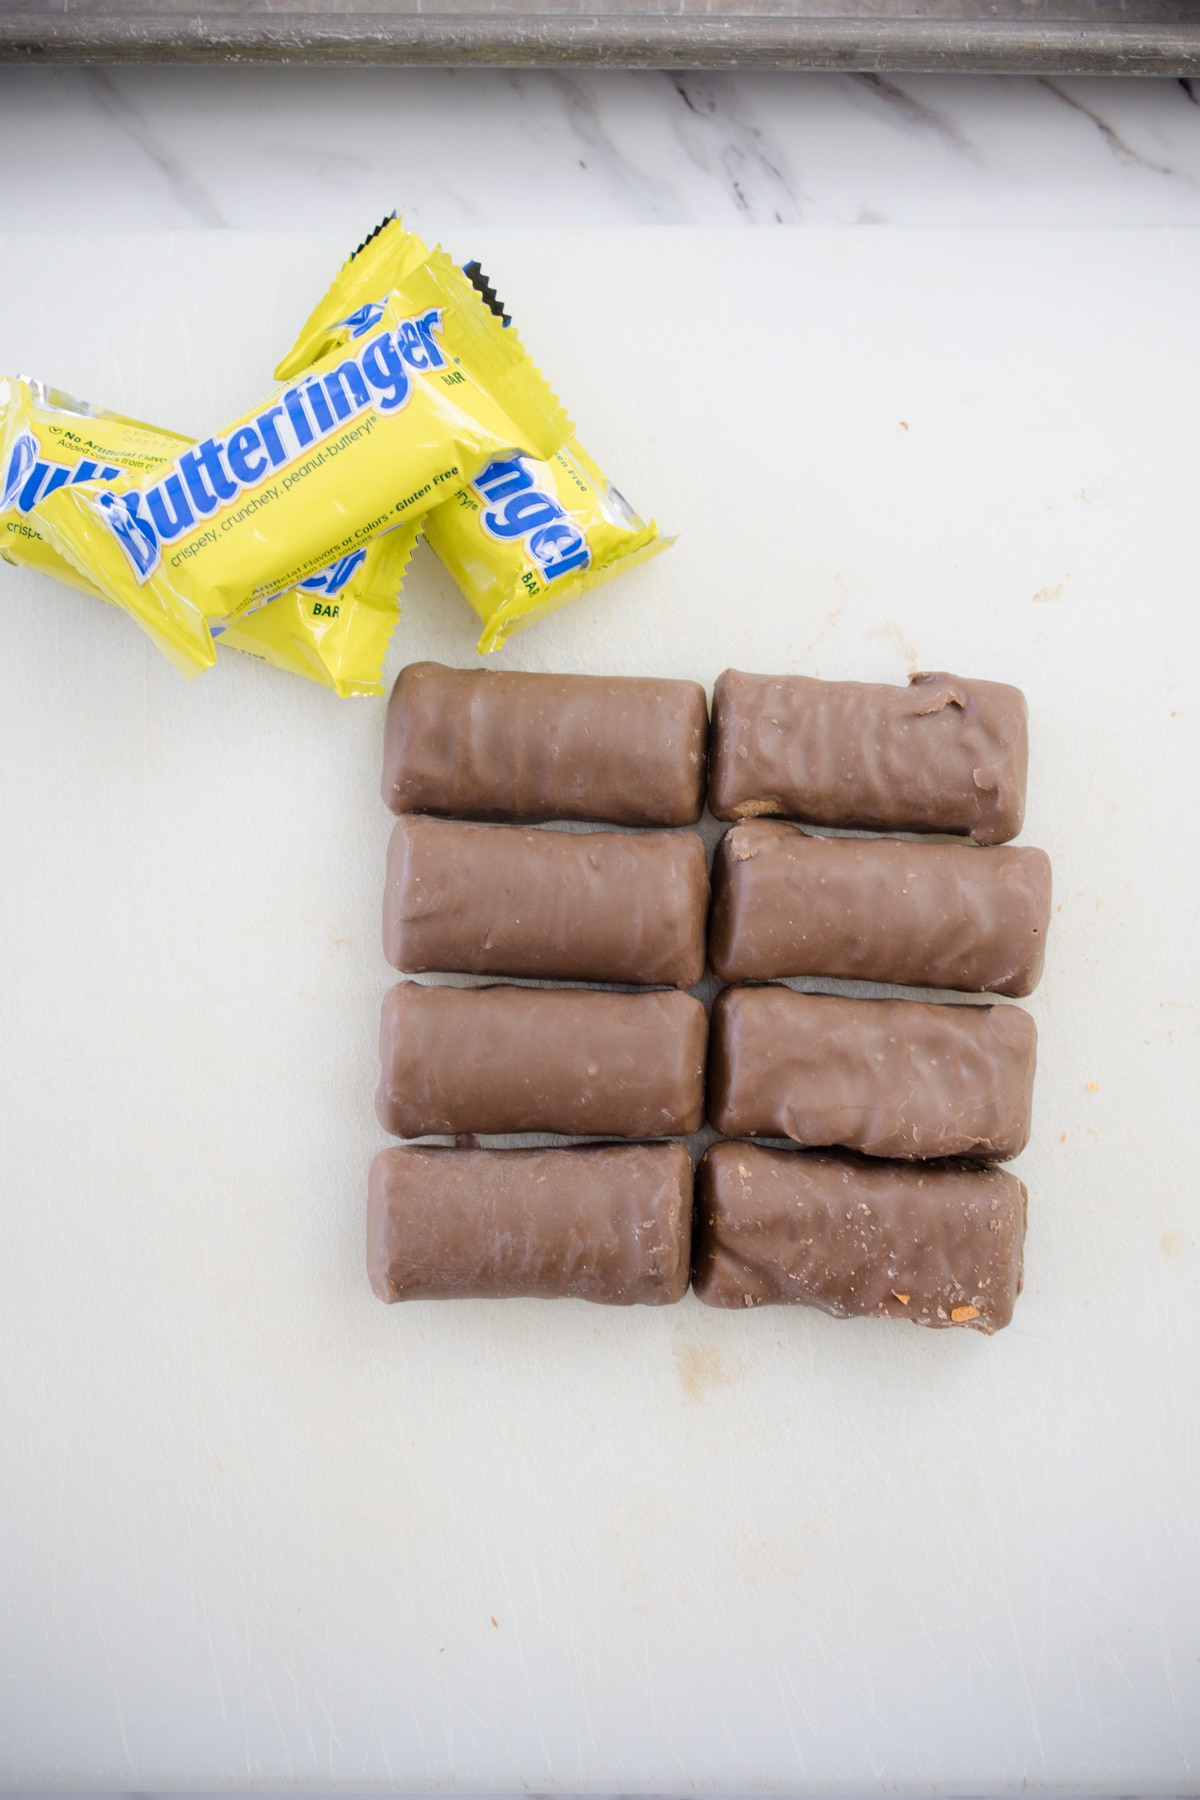 Top view of Butterfingers candies.